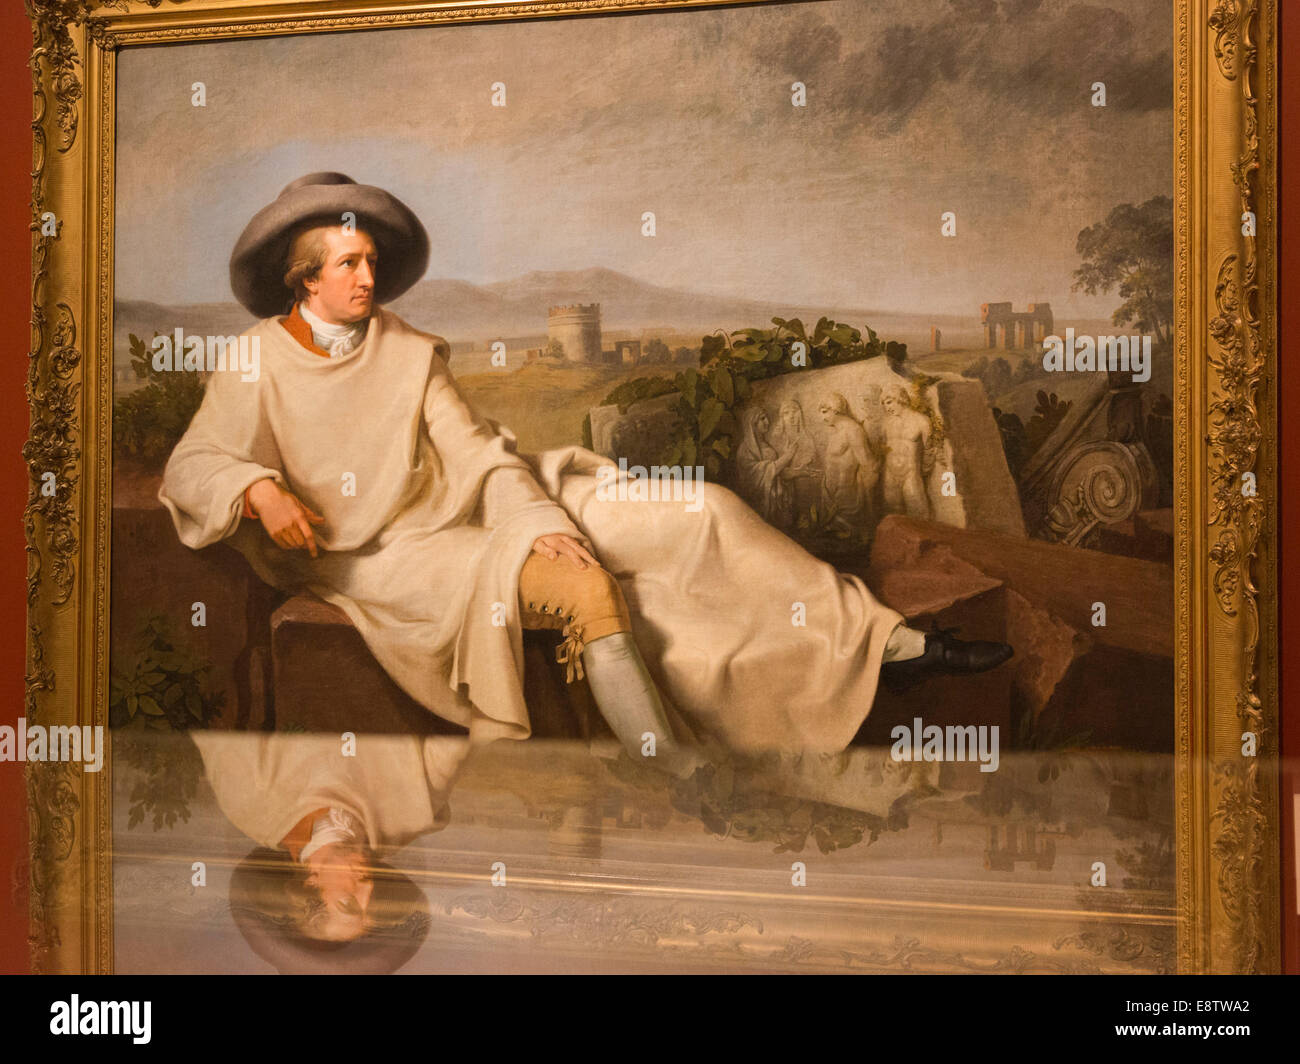 The exhibition 'Germany - Memories of a Nation' opens at the British Museum, London. Goethe in the Roman Campagna by Tischbein. Stock Photo